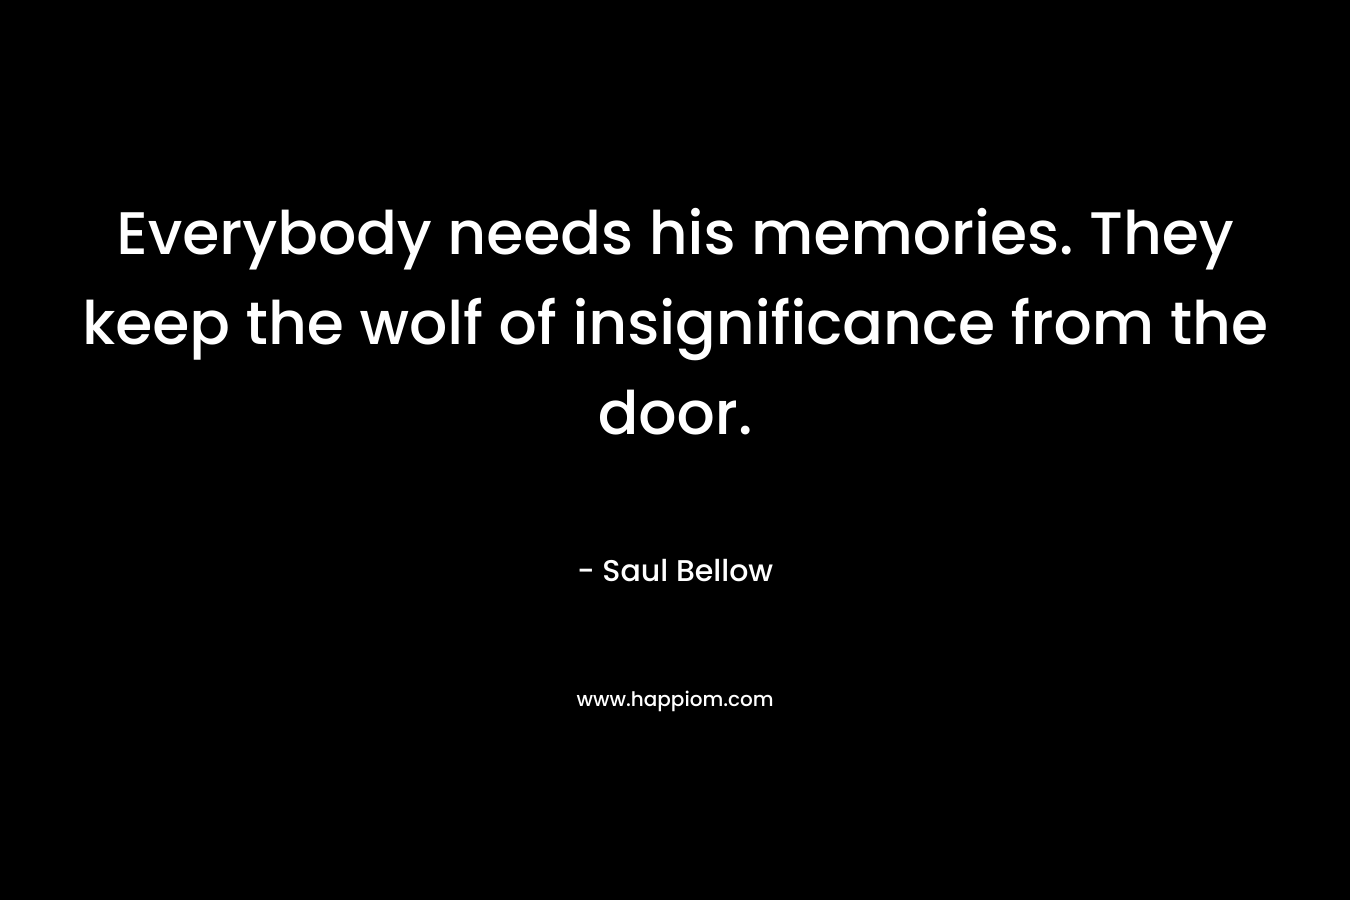 Everybody needs his memories. They keep the wolf of insignificance from the door.